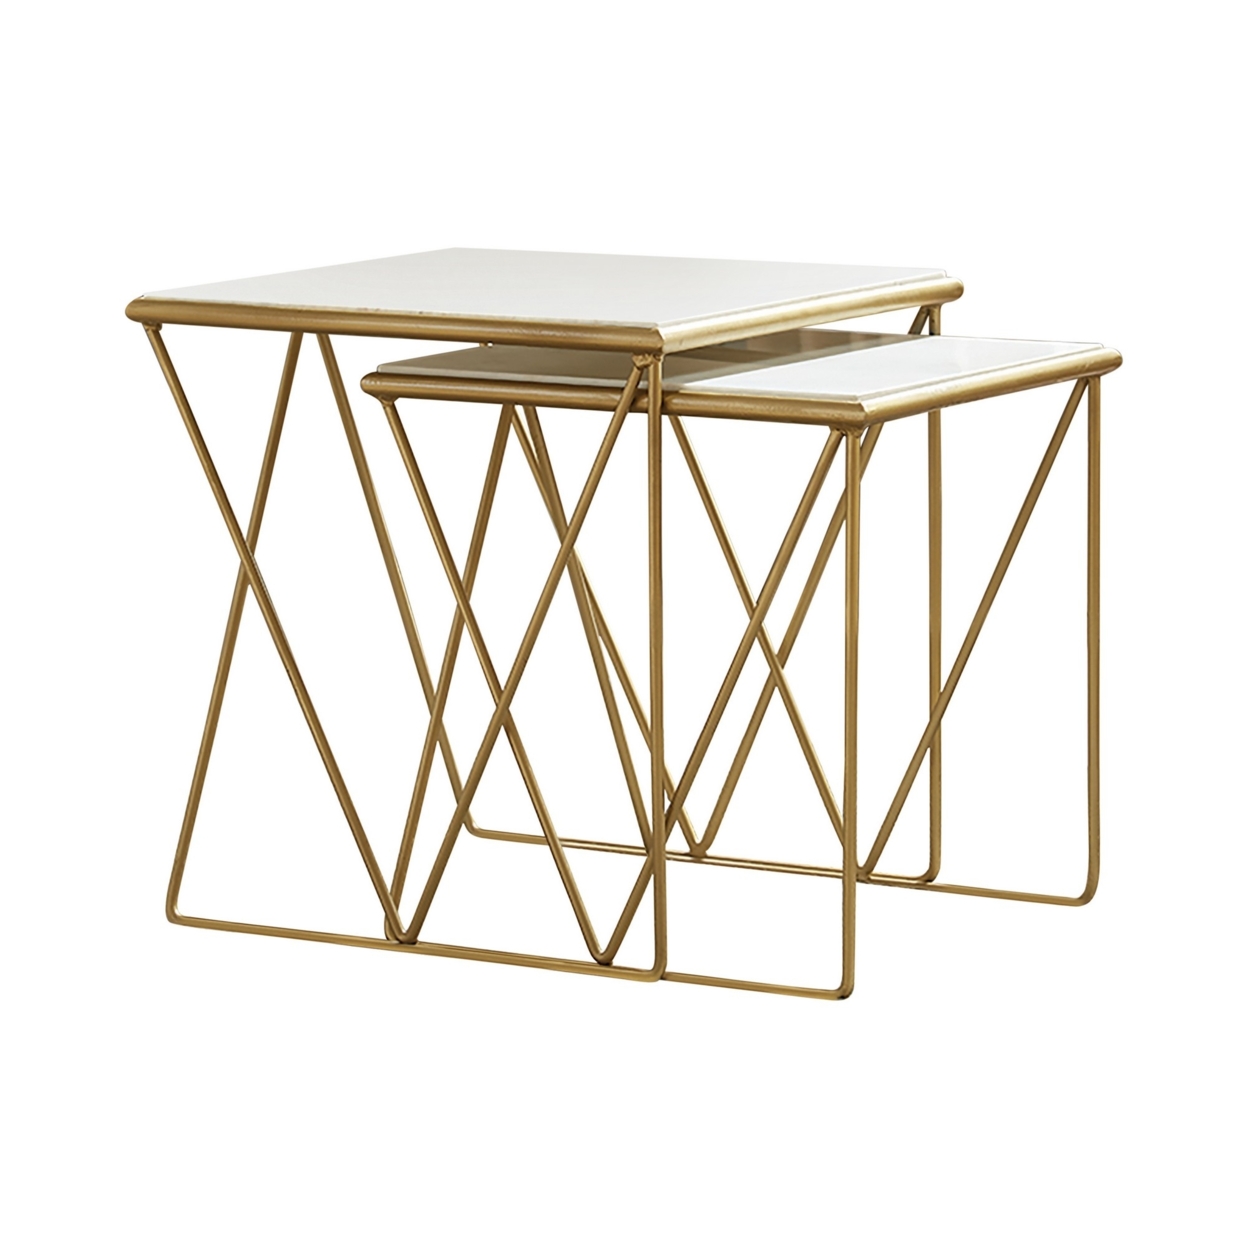 2 Piece Marble Top Nesting Table With Geometric Base, White And Gold- Saltoro Sherpi